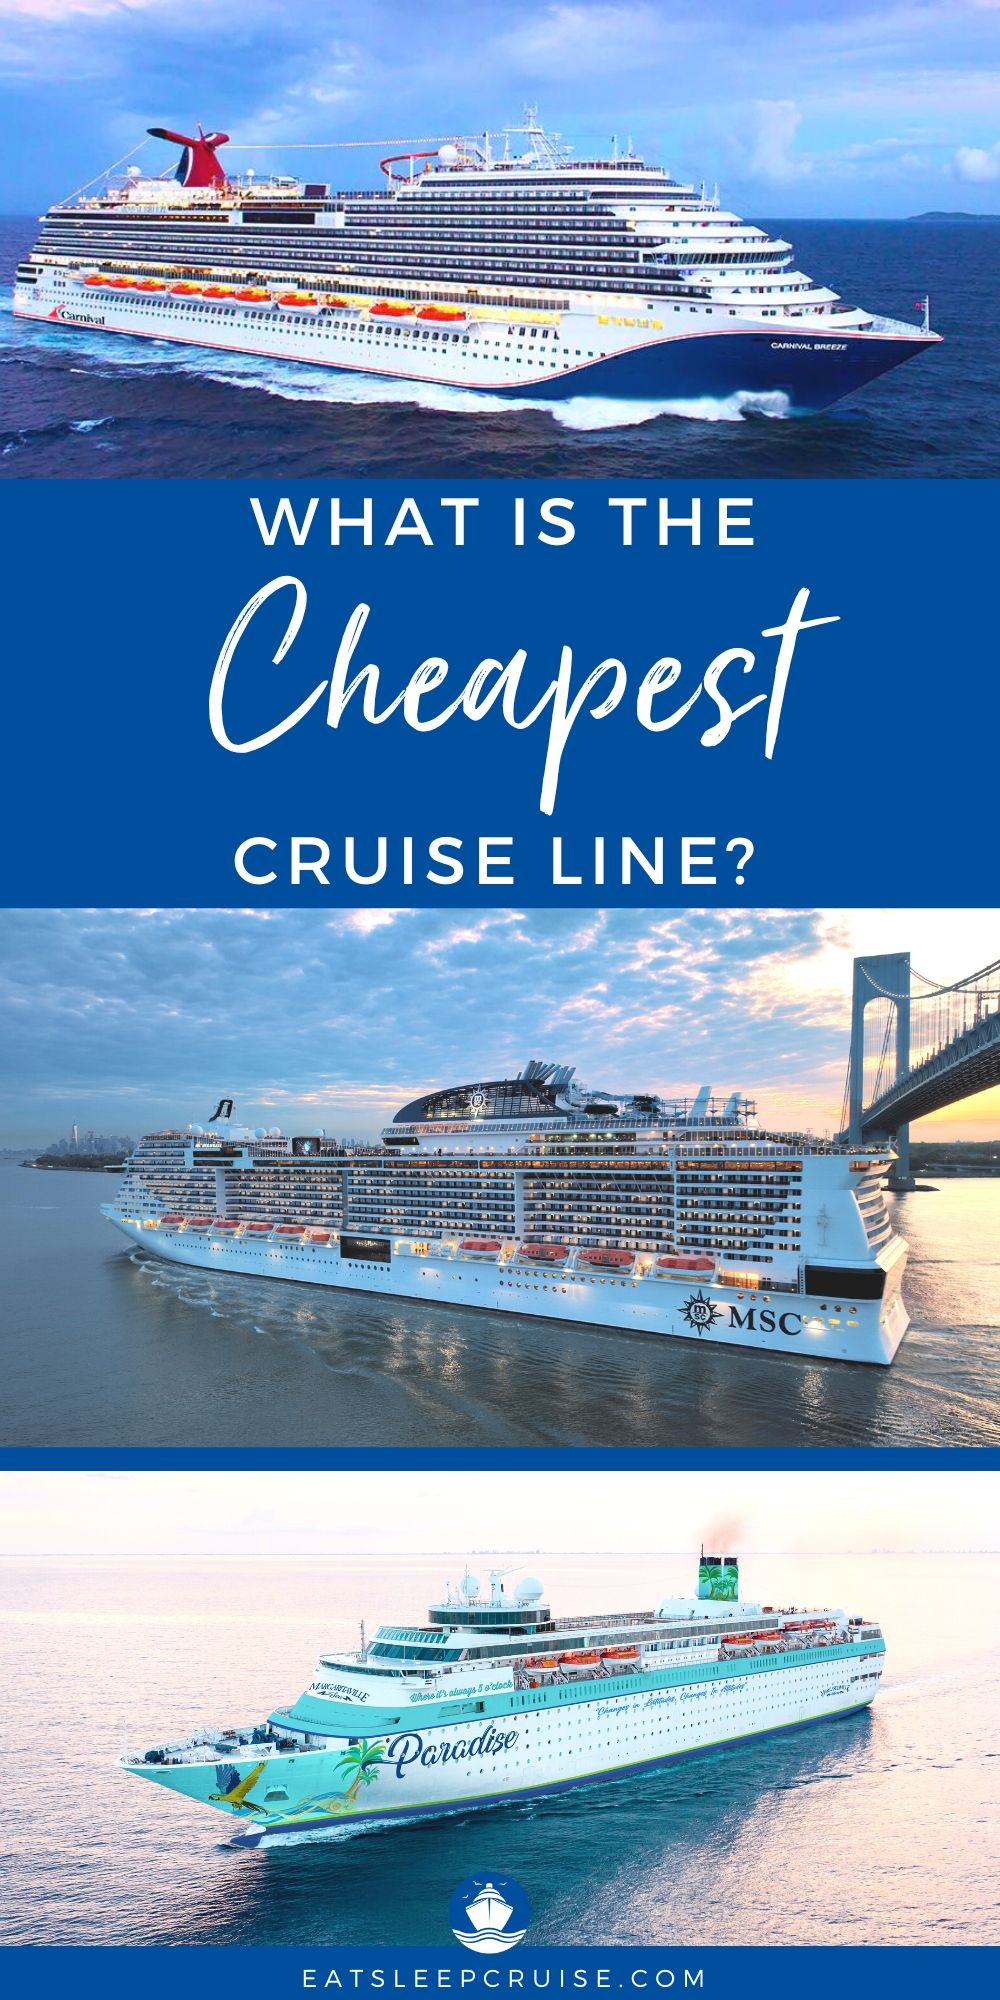 What is the Cheapest Cruise Line?